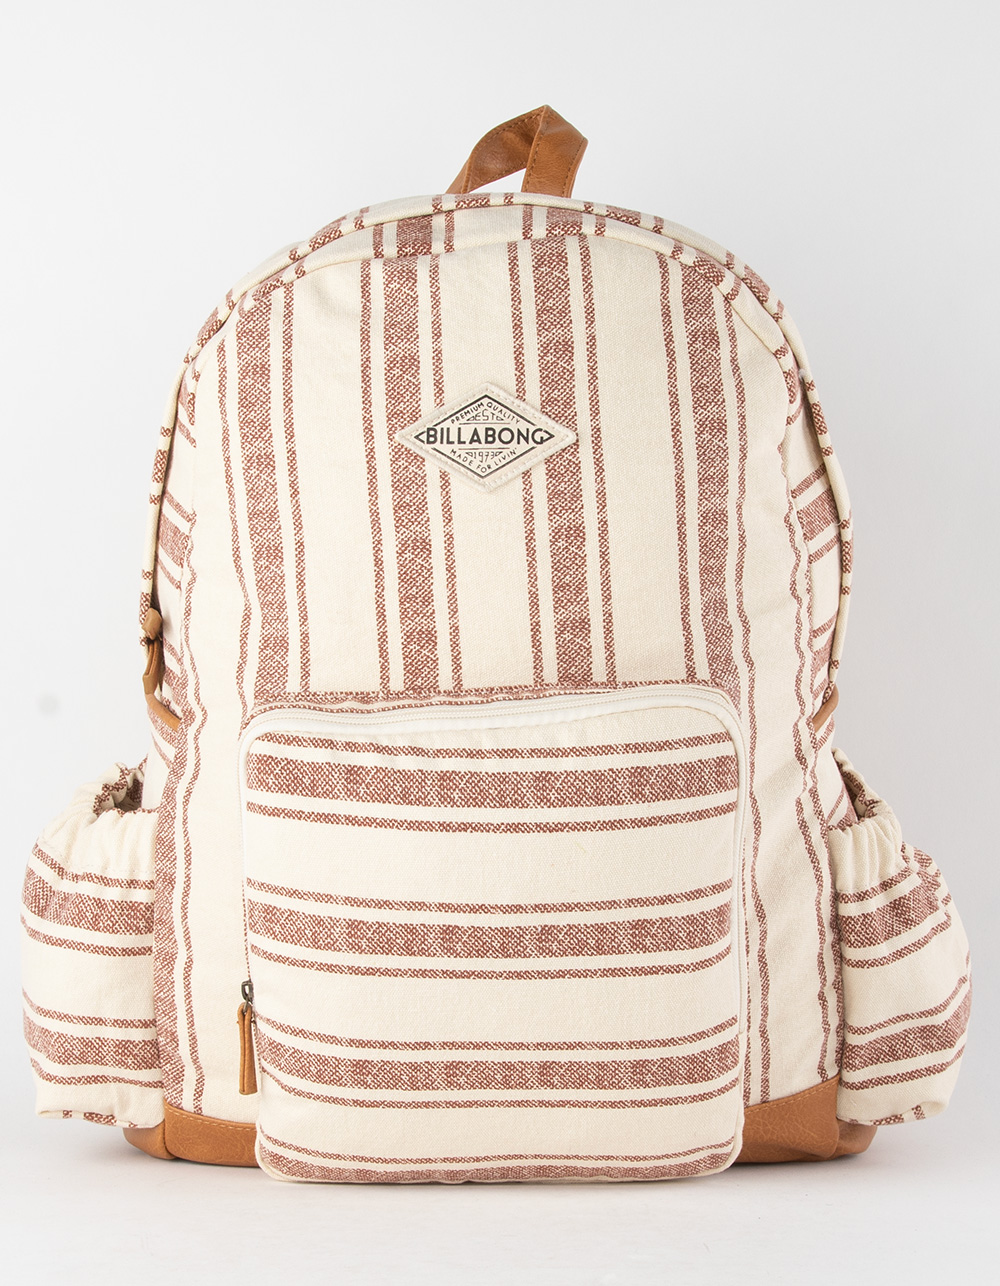 BILLABONG Home Abroad Backpack - BROWN/WHITE | Tillys